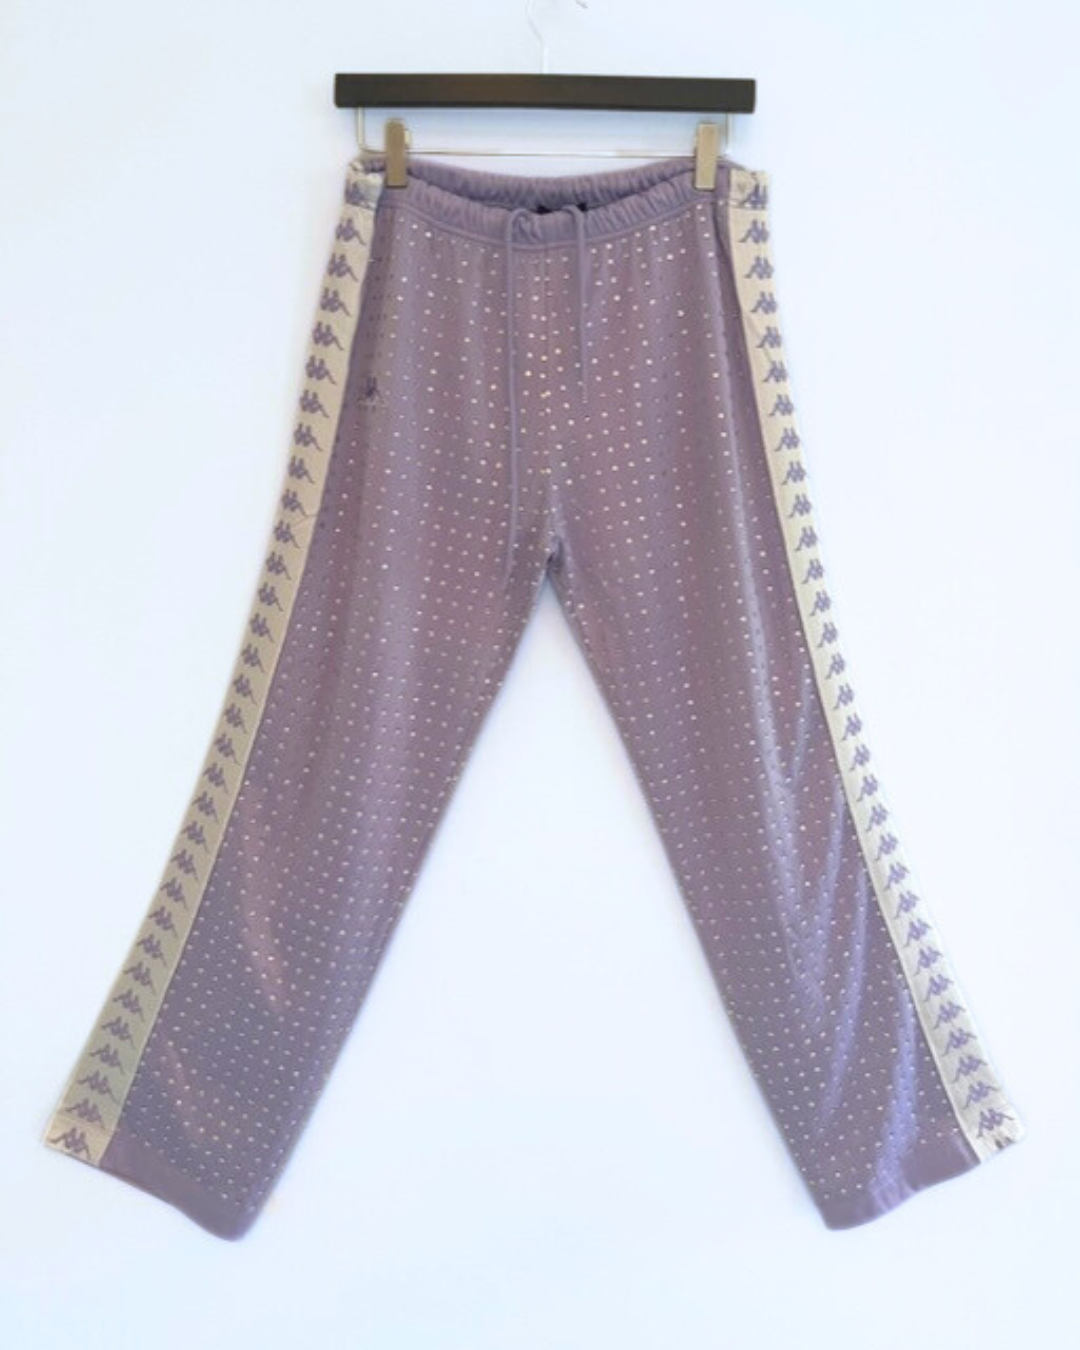 Vintage Lilac / White Stripe KAPPA Tracksuit pants with all over diamante studs